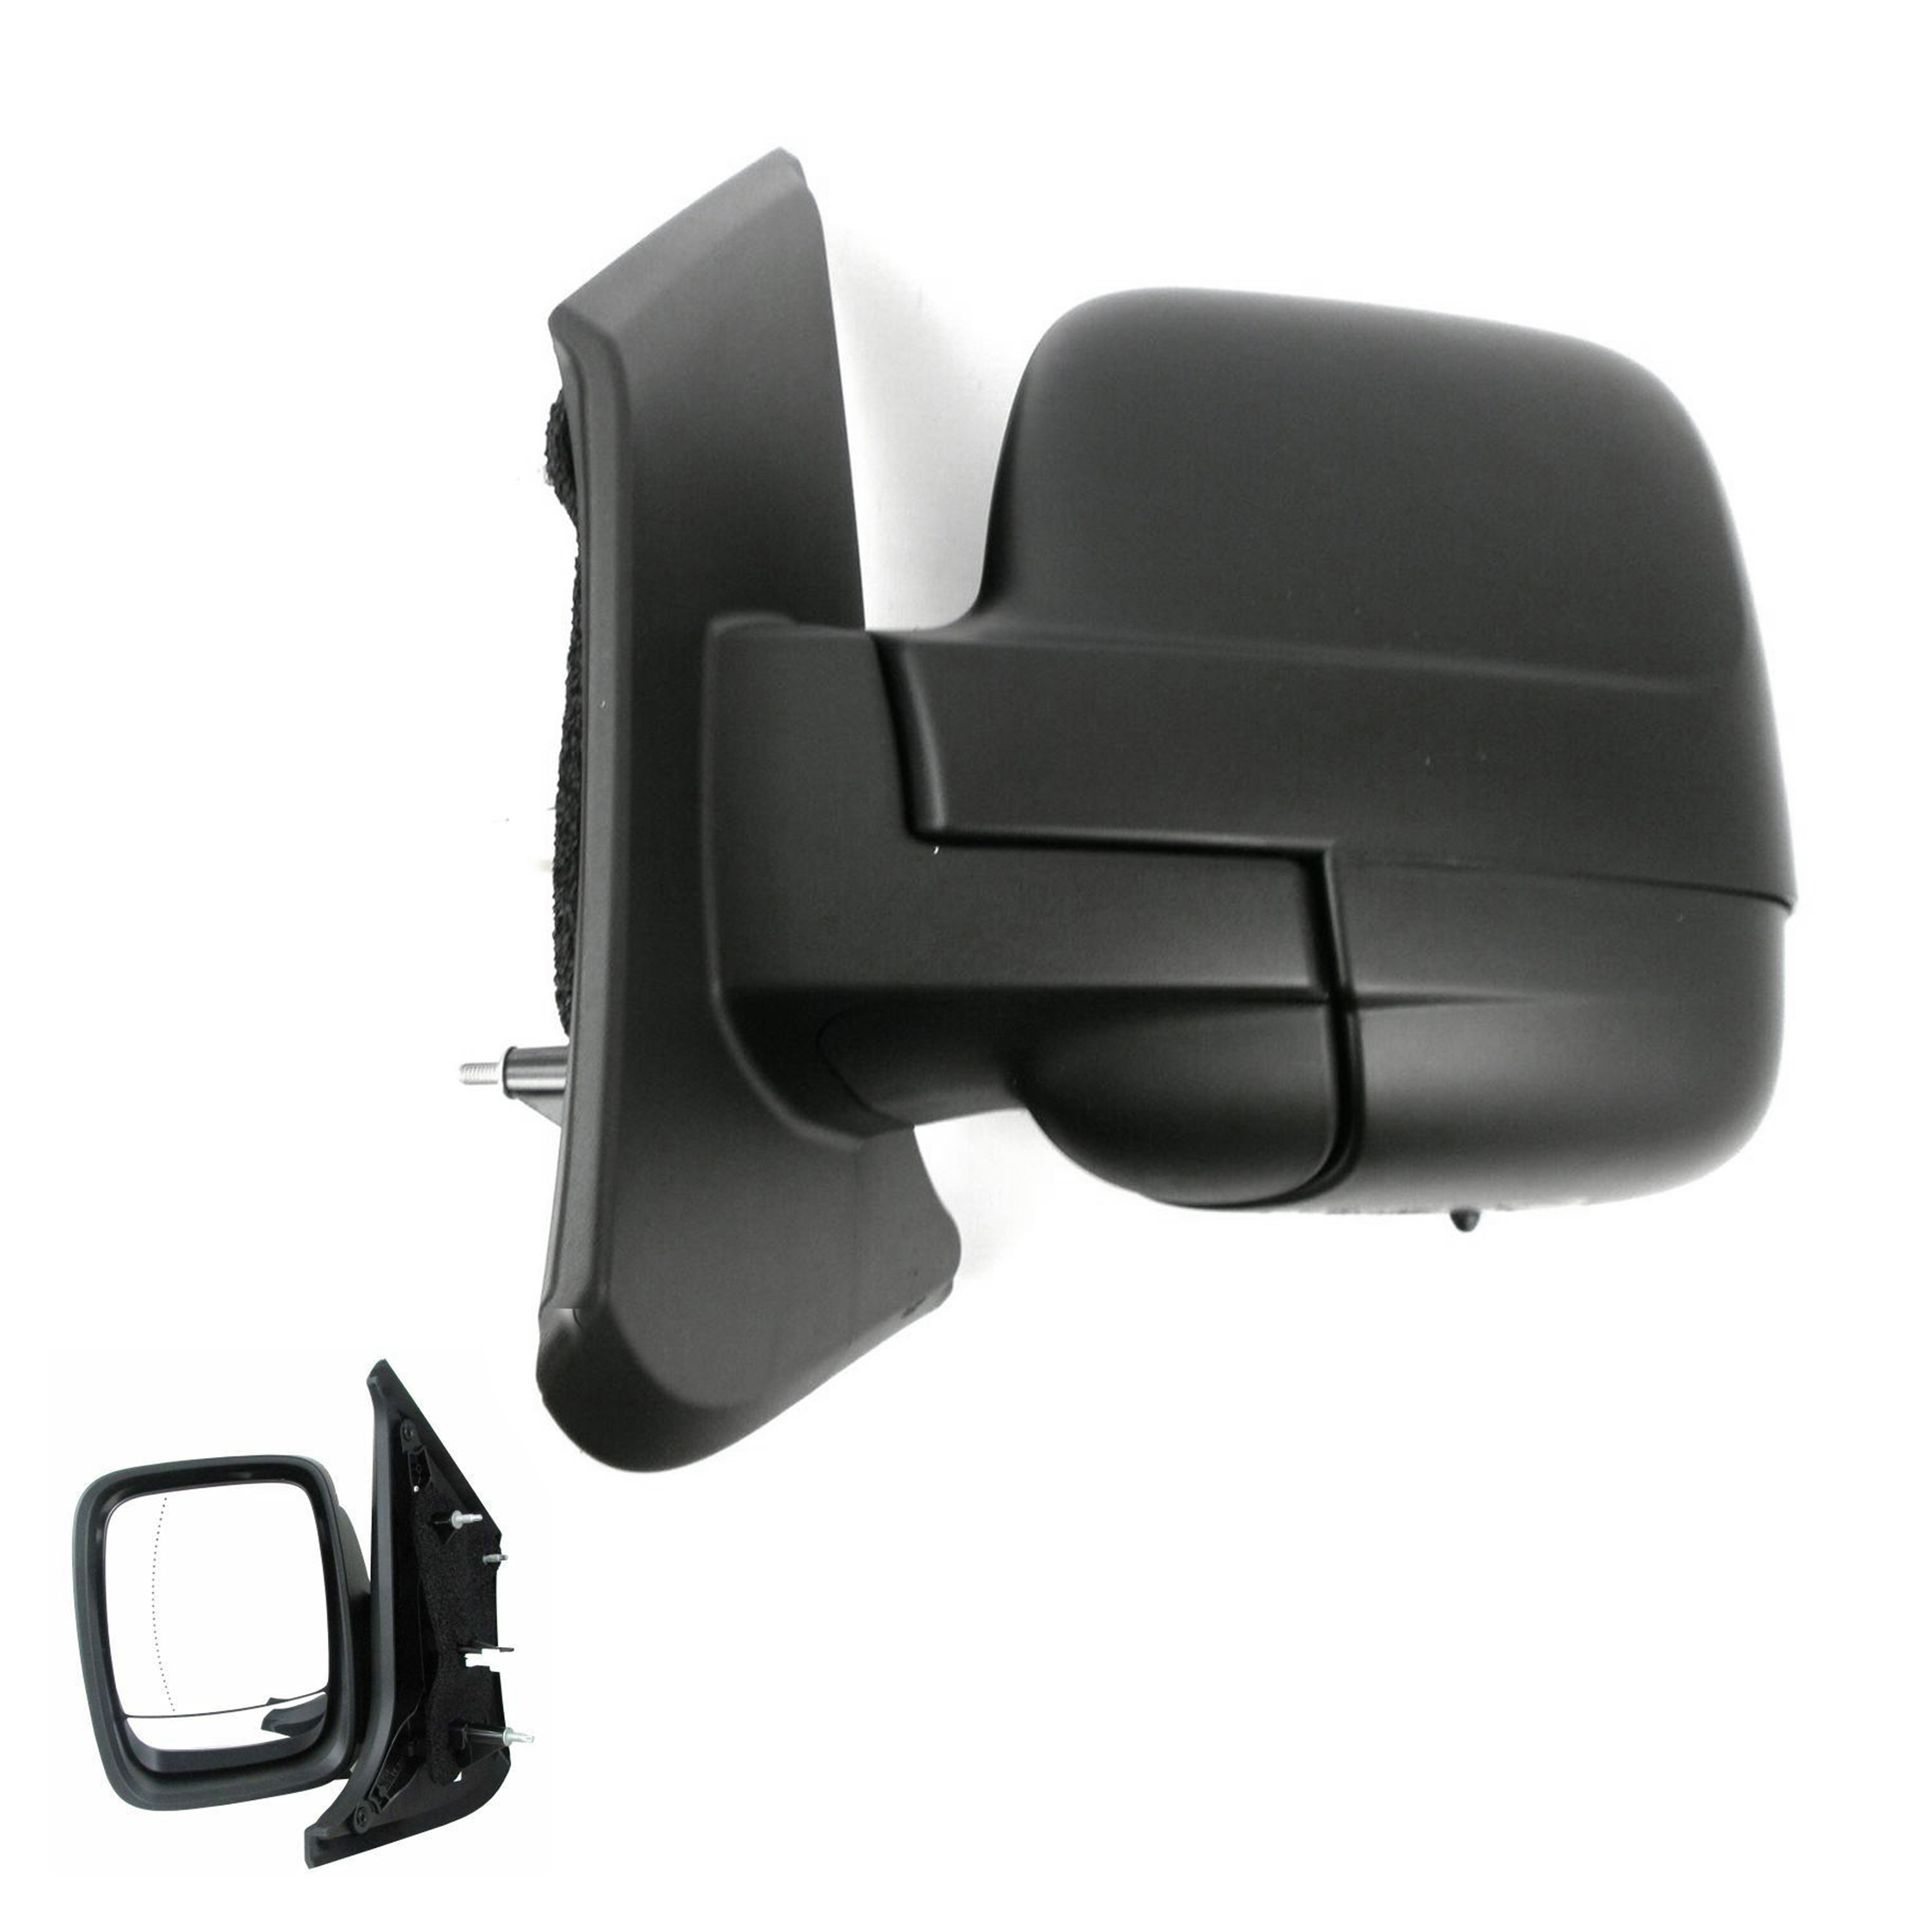 FIAT Talento Complete Wing Mirror Unit LEFT HAND ( UK Passenger Side ) 2014 to 2020 – Electric Wing Mirror Unit